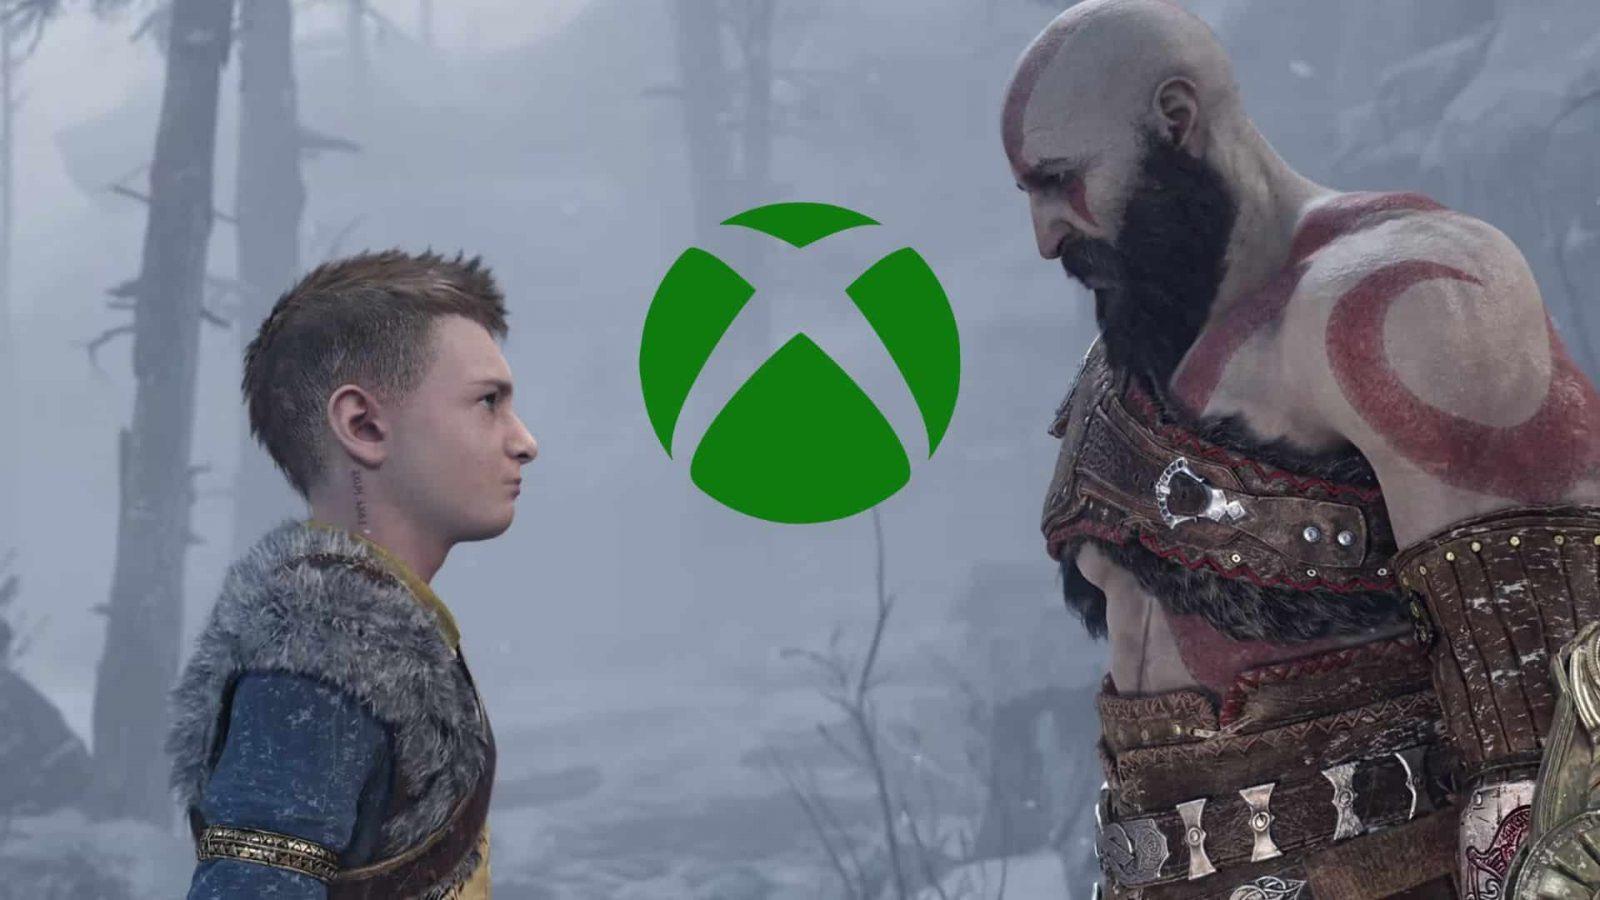 Listen up folks, Kratos doesn't really care if you prefer PS5 ox Xbox